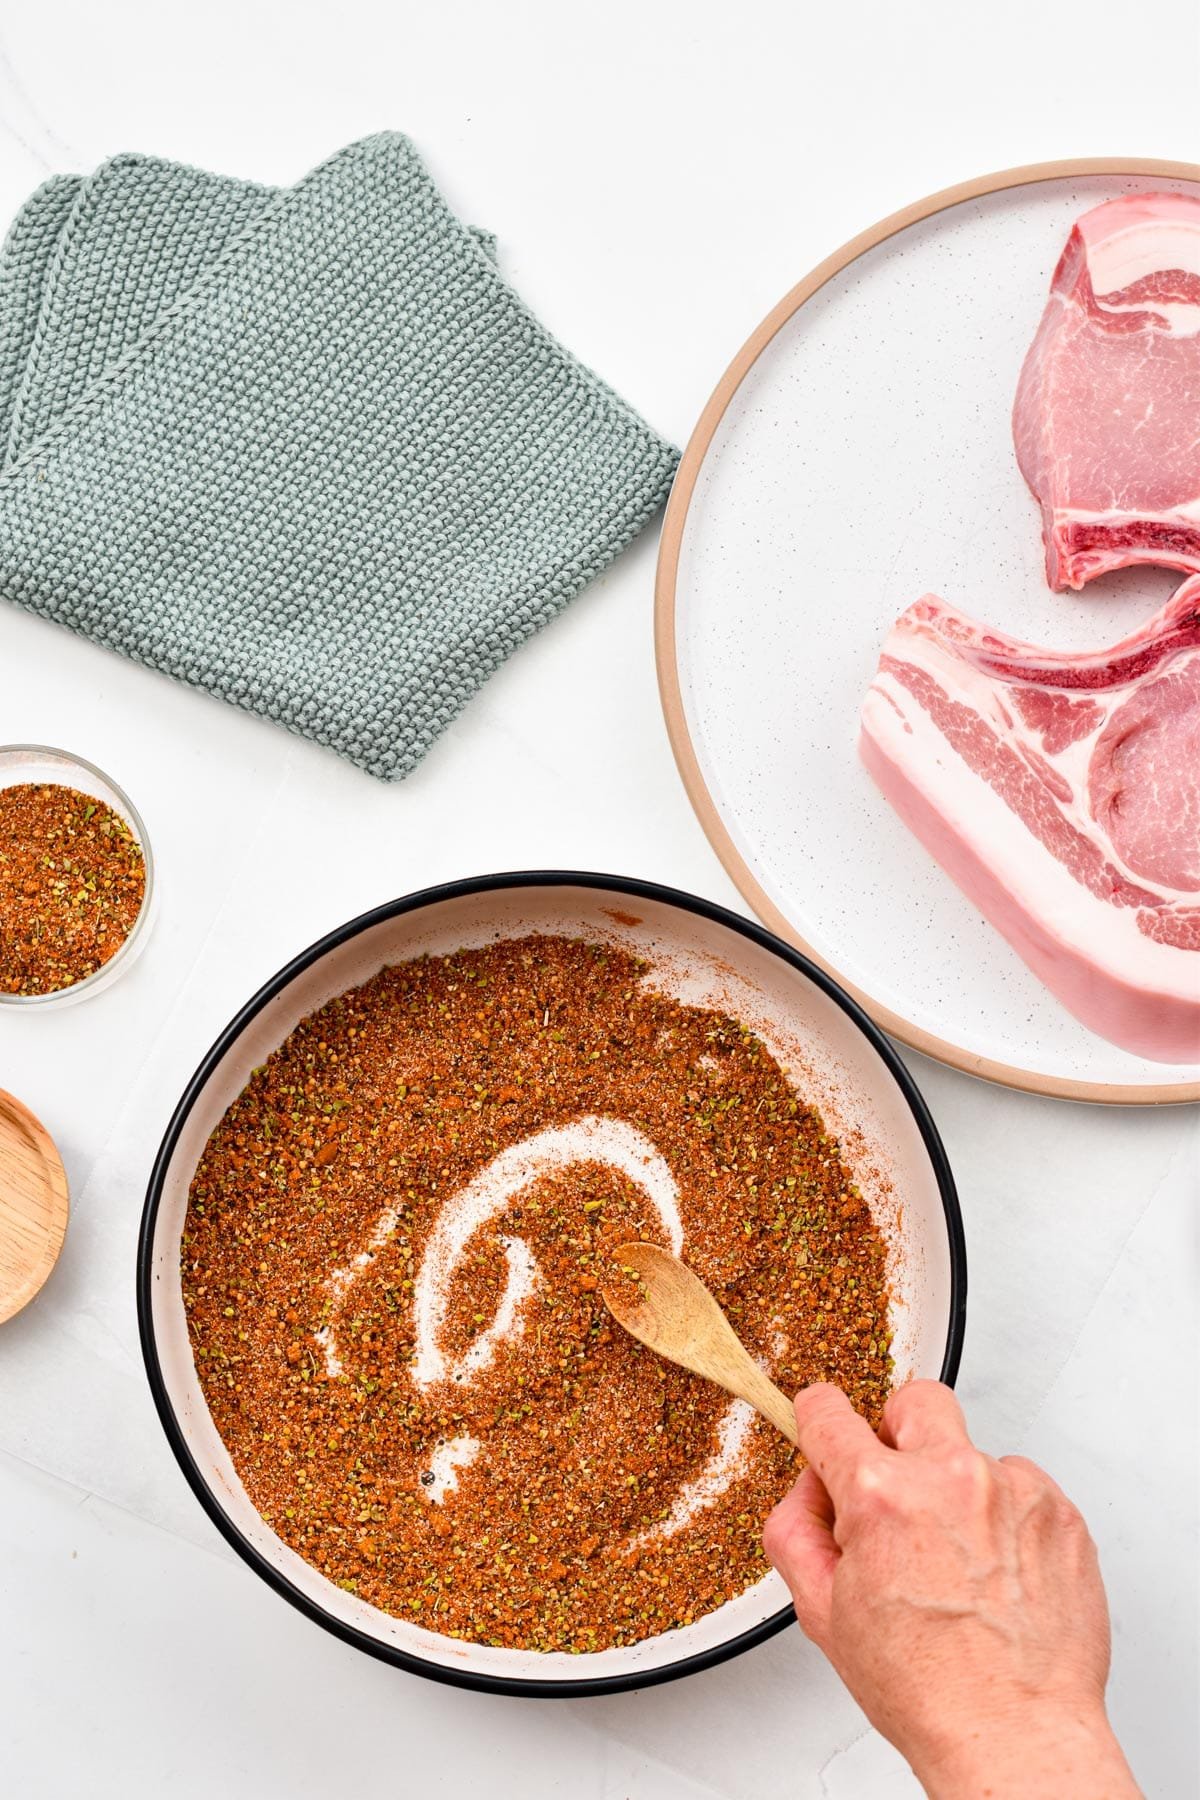 Stirring the pork seasoning ingredients with a wooden spoon on a large bowl next to a plate with pork chops.